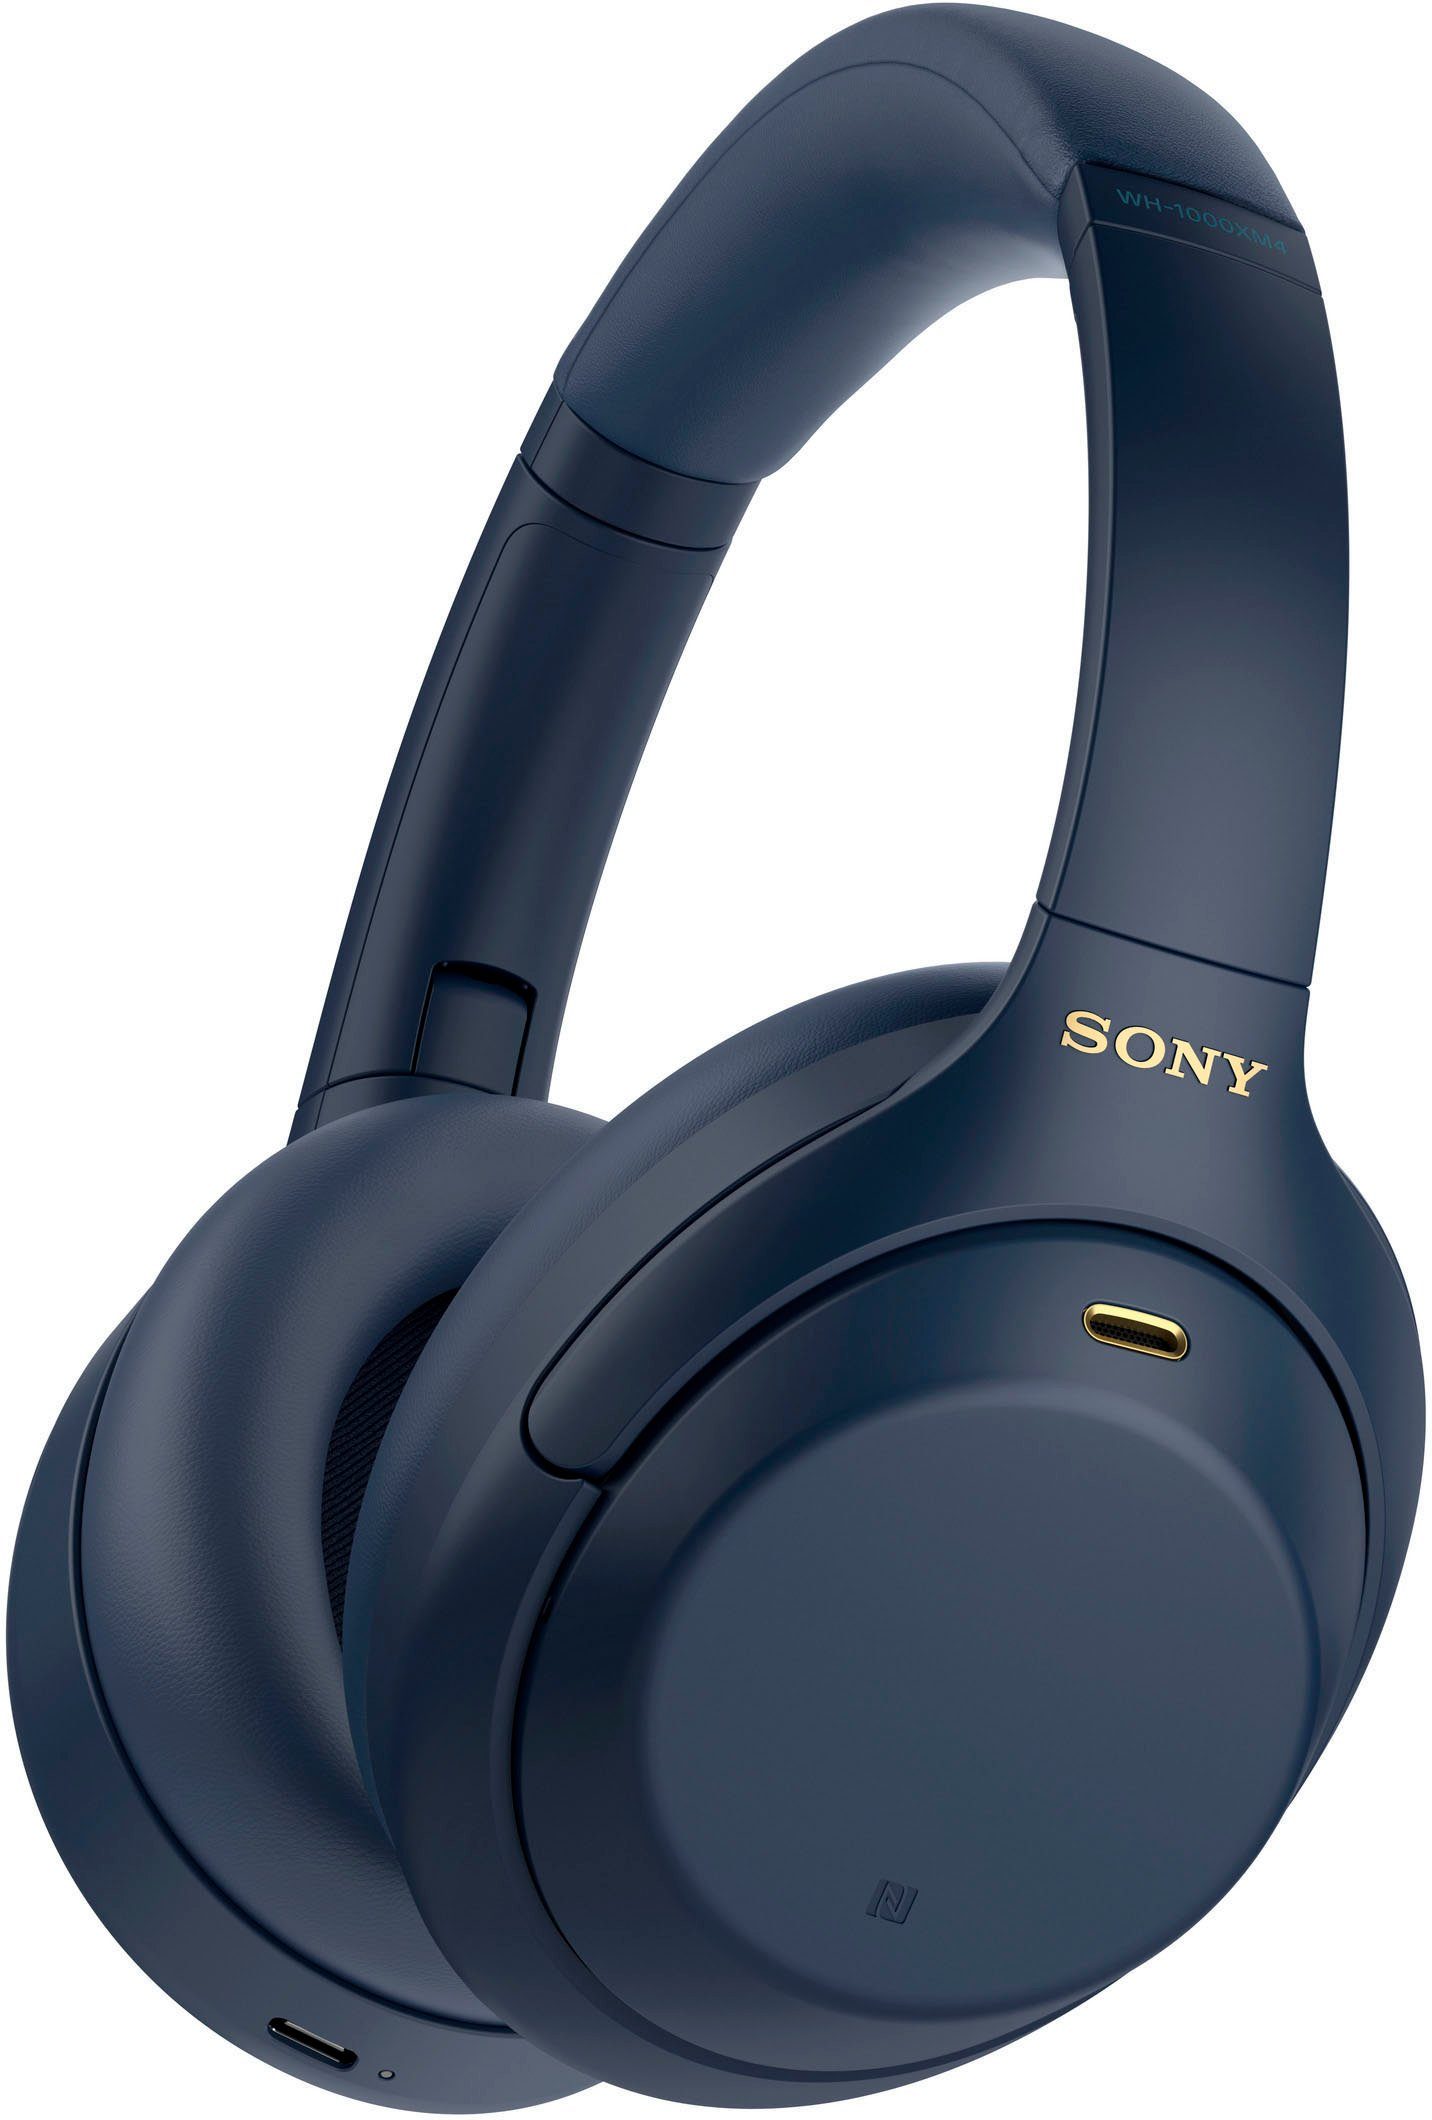 Sony WH-1000XM4 kabelloser Over-Ear-Kopfhörer (Noise-Cancelling, One-Touch Verbindung via NFC, Bluetooth, NFC, Touch Sensor, Schnellladefunktion) blau